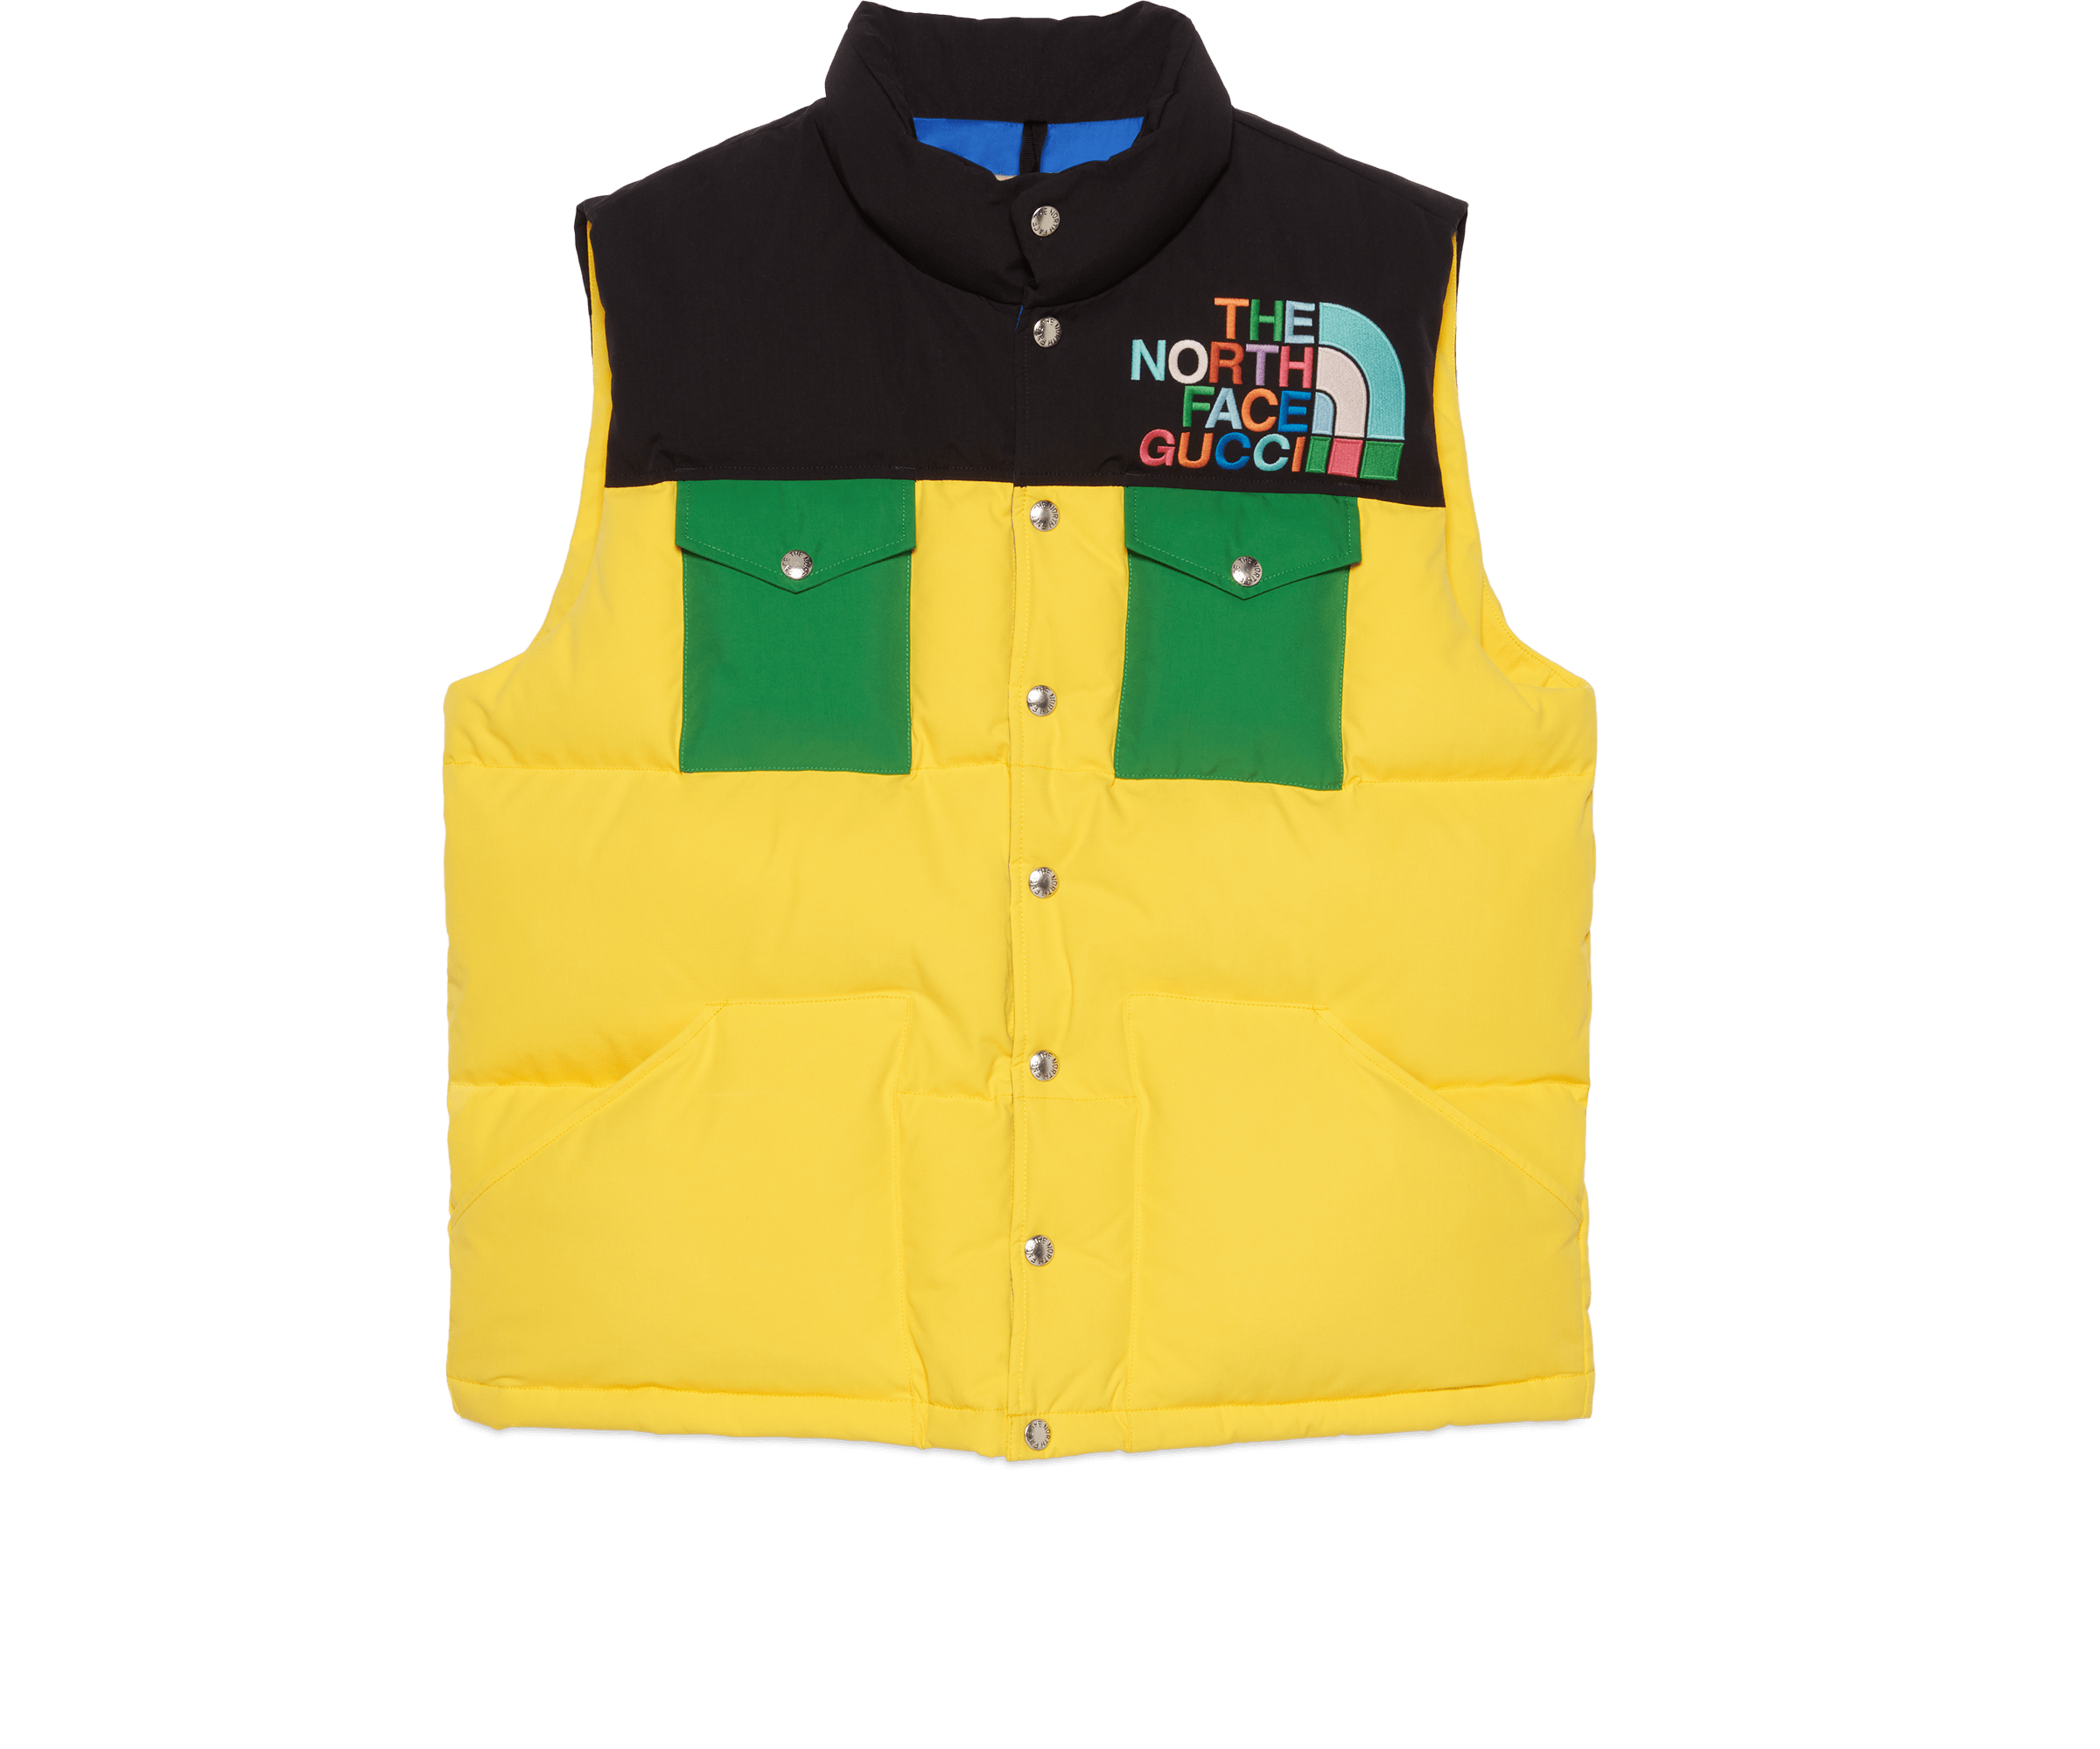 Product image for the new The North Face and Gucci collection